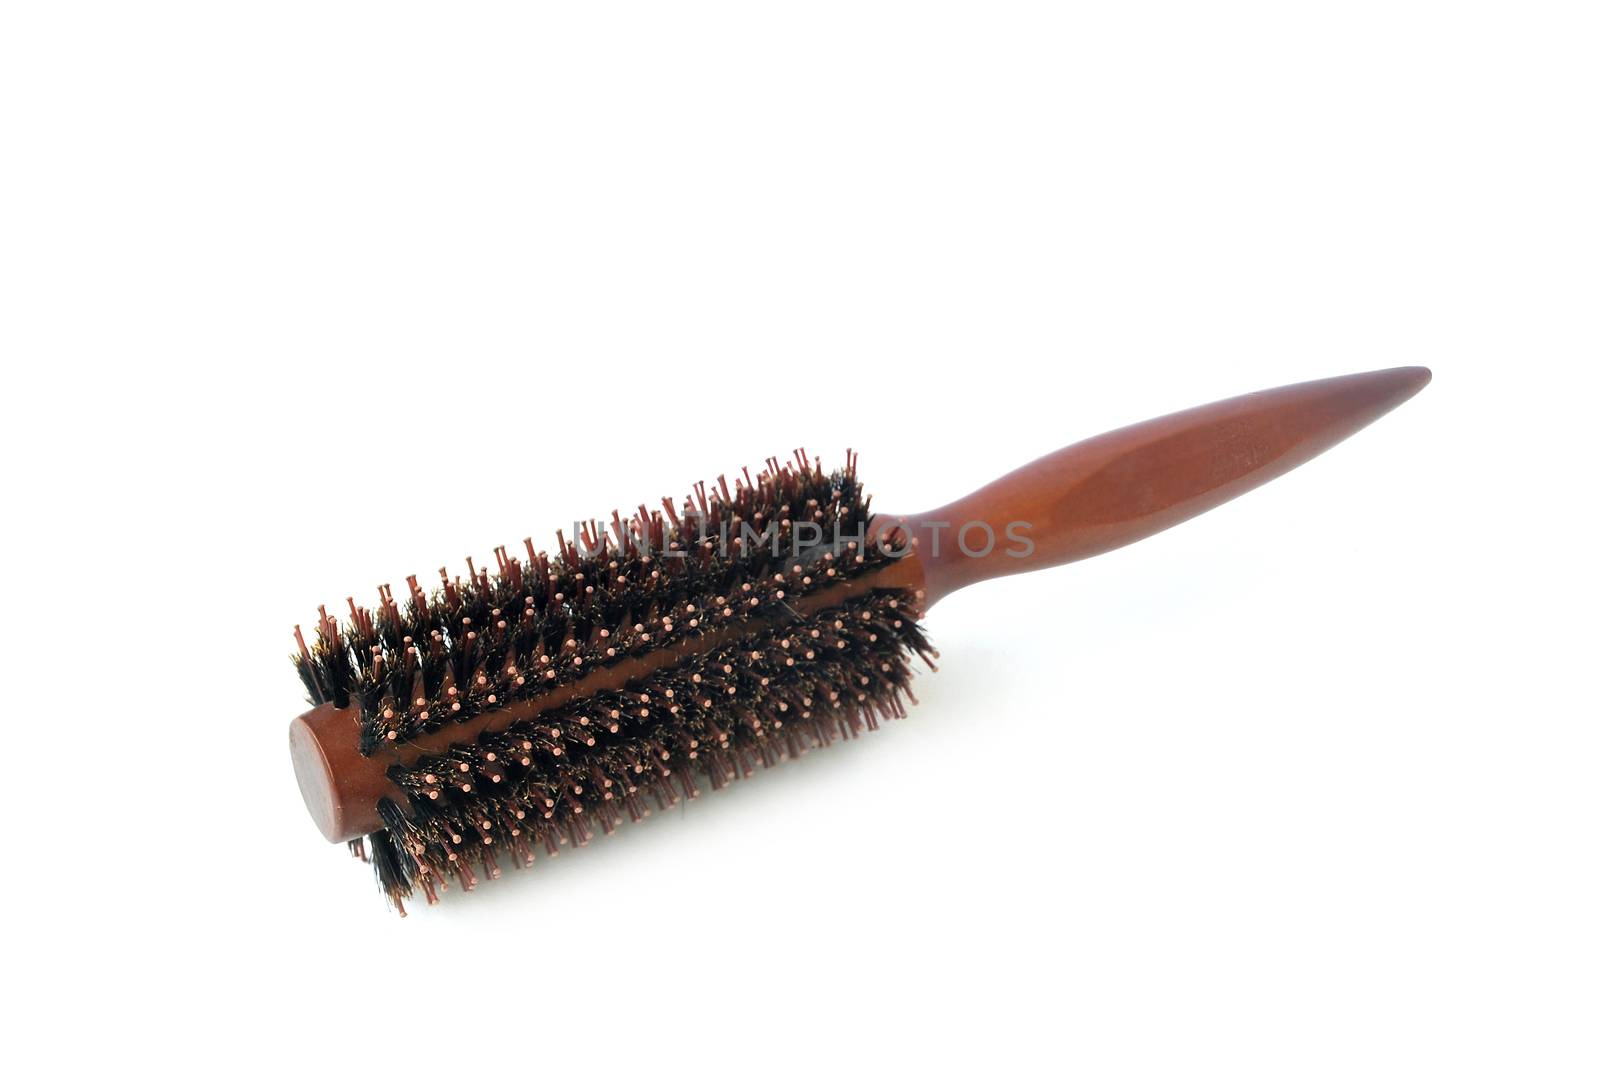 Hair comb on white background.With Clipping Path.